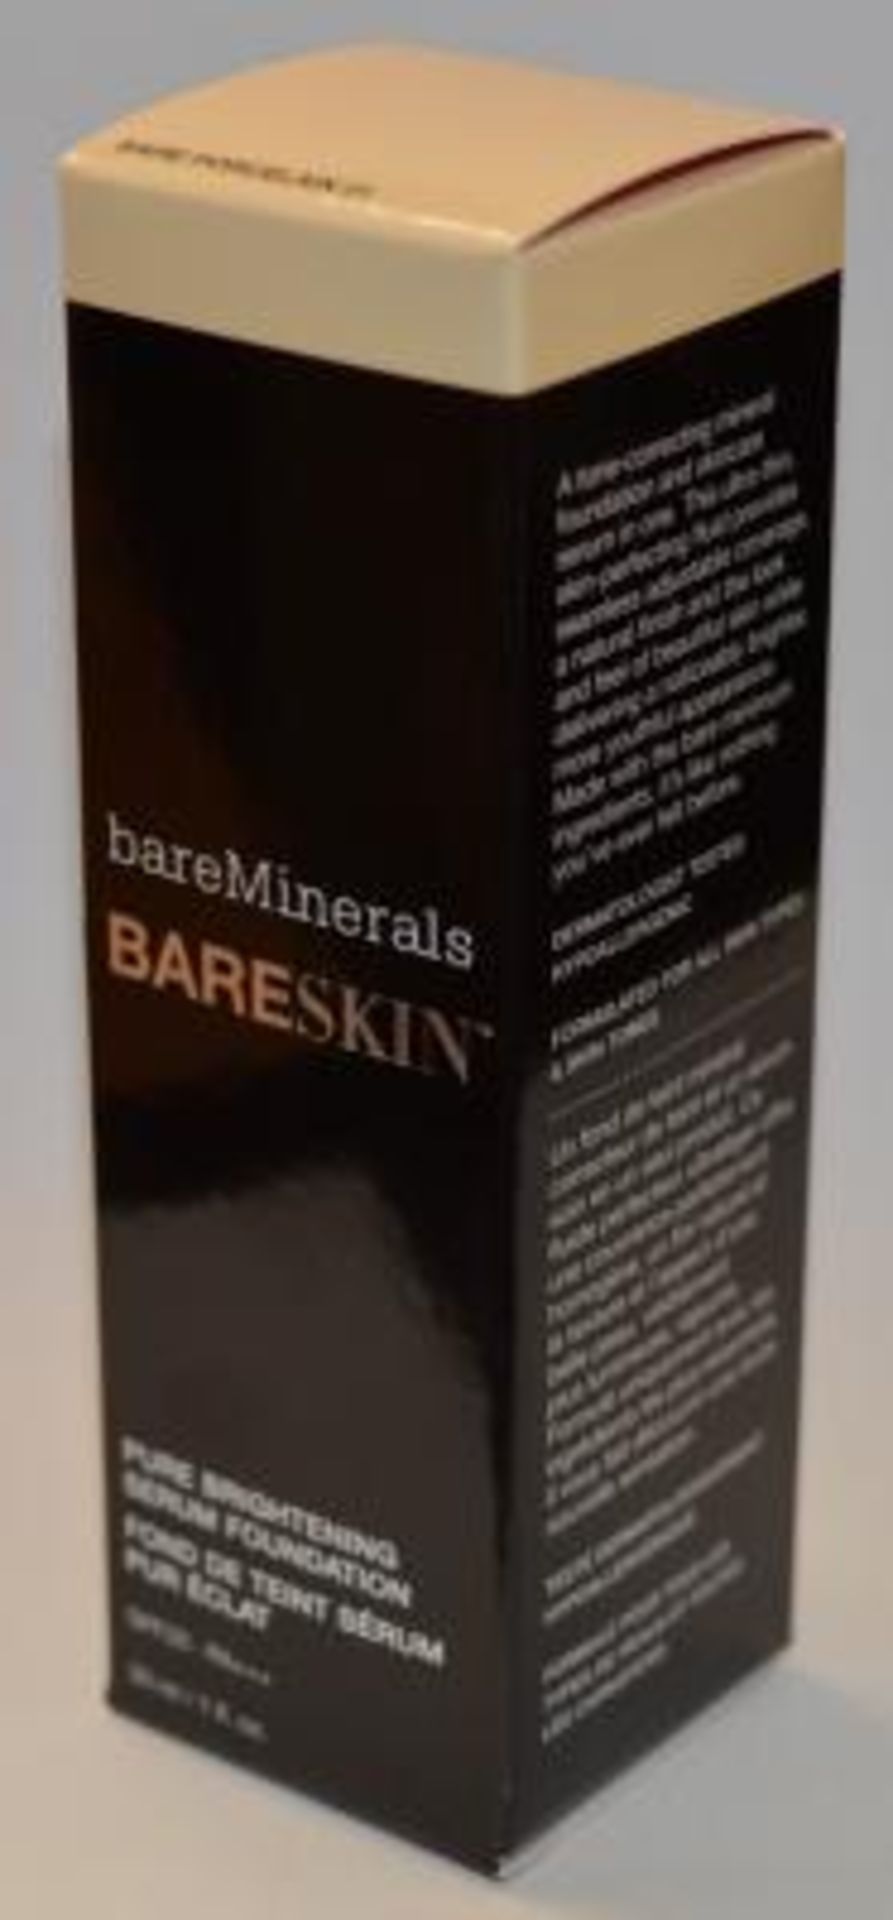 1 x Bare Escentuals bareMinerals “BARESKIN” Perfecting Face Brush - Genuine Product - Brand New - Image 8 of 14